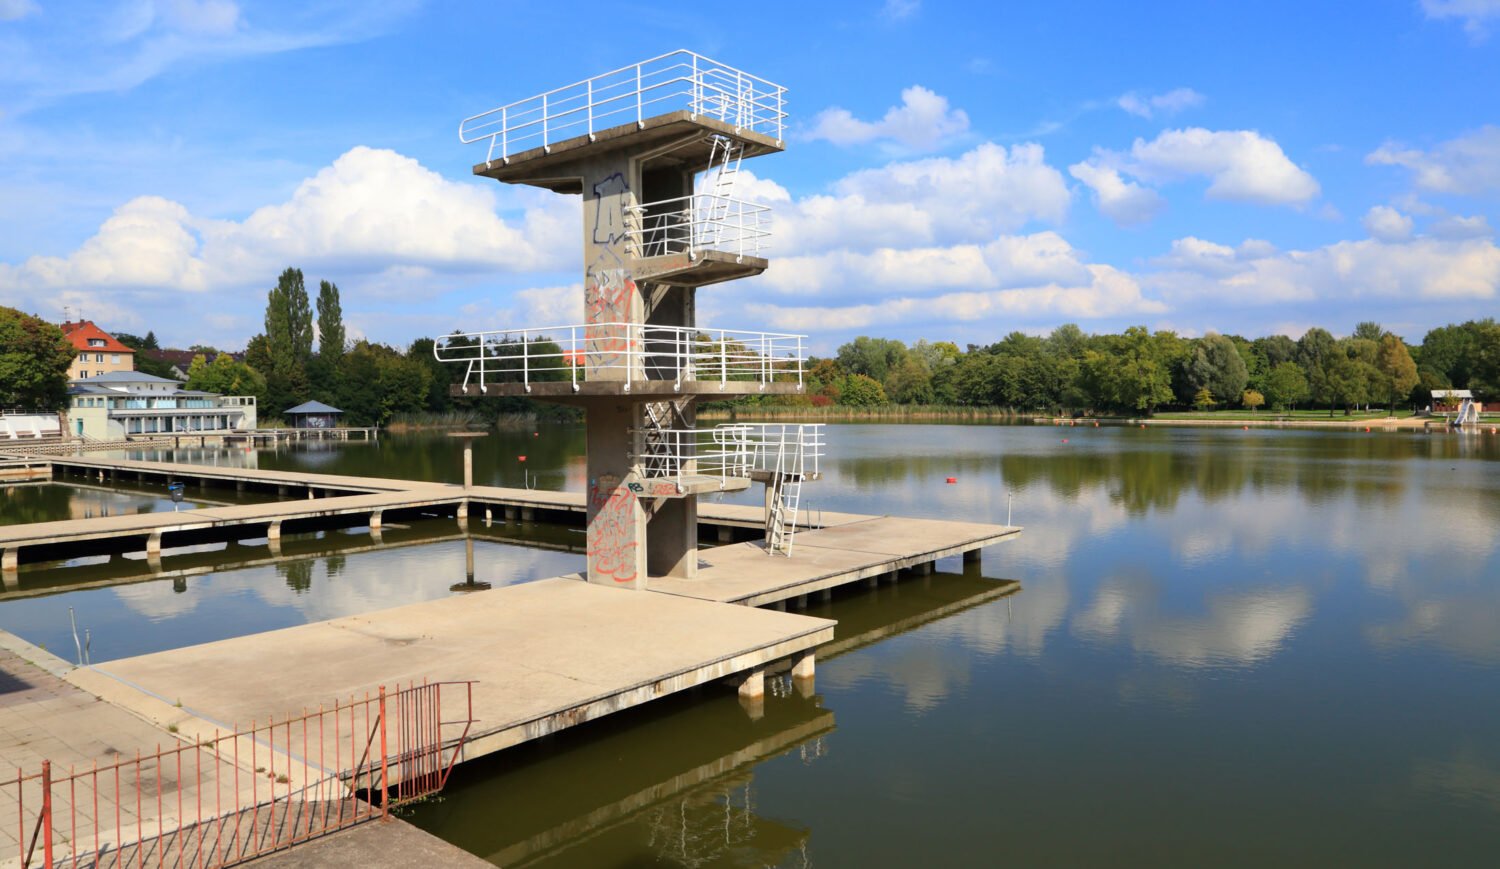 The Woog was probably created in the mid-16th century as a fire-fighting pond. Today it is a popular family swimming pool in the middle of Darmstadt © Branko Srot - stock.adobe.com